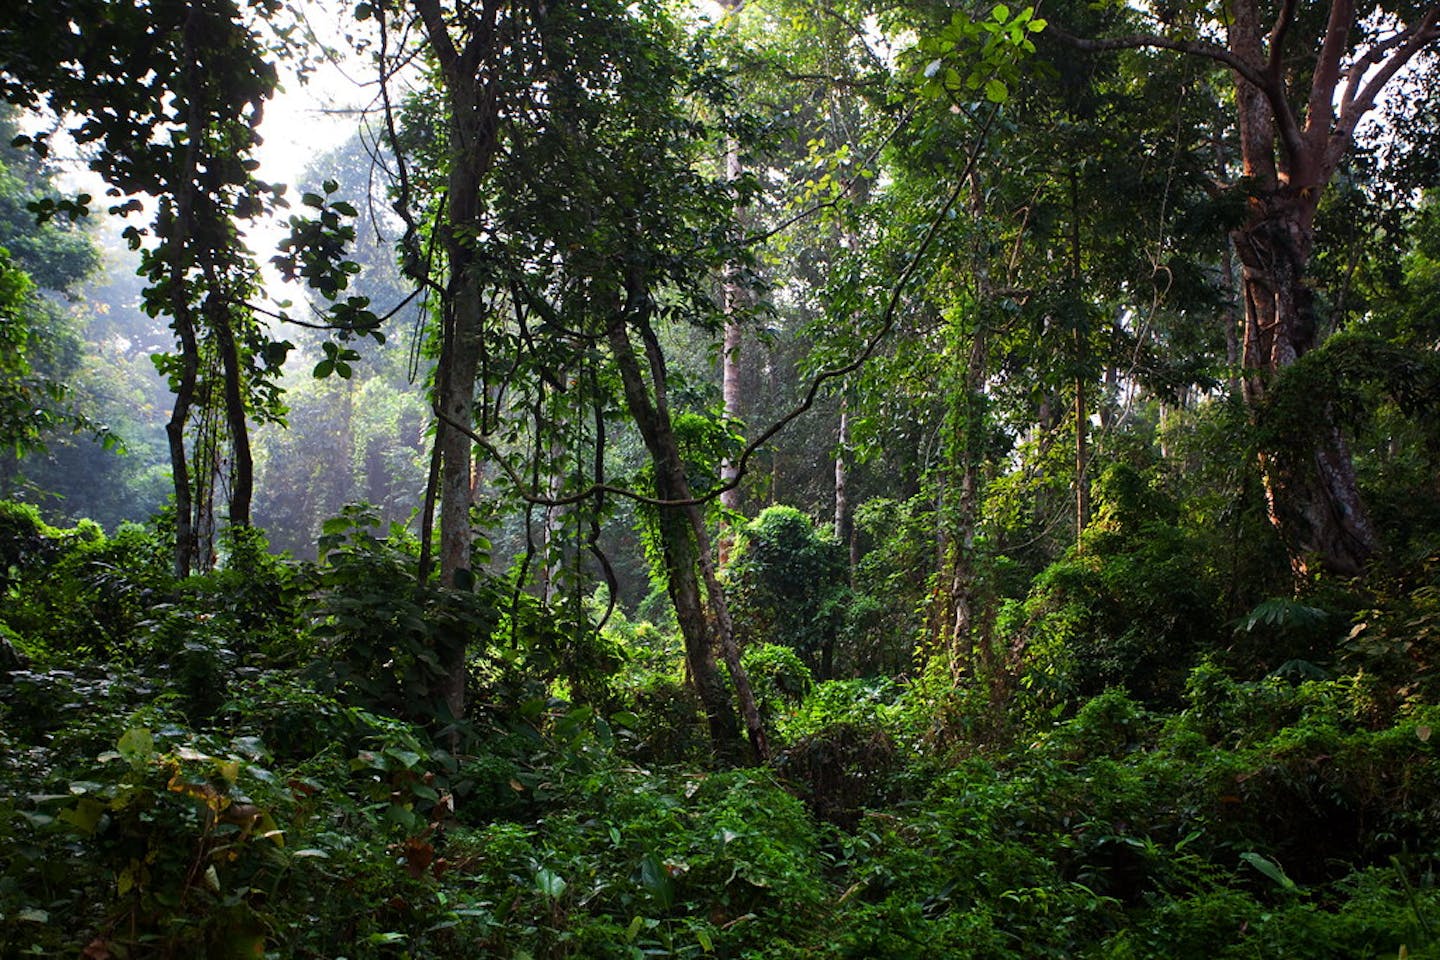 CDP launches world’s first disclosure framework for banks integrating climate and forest impact